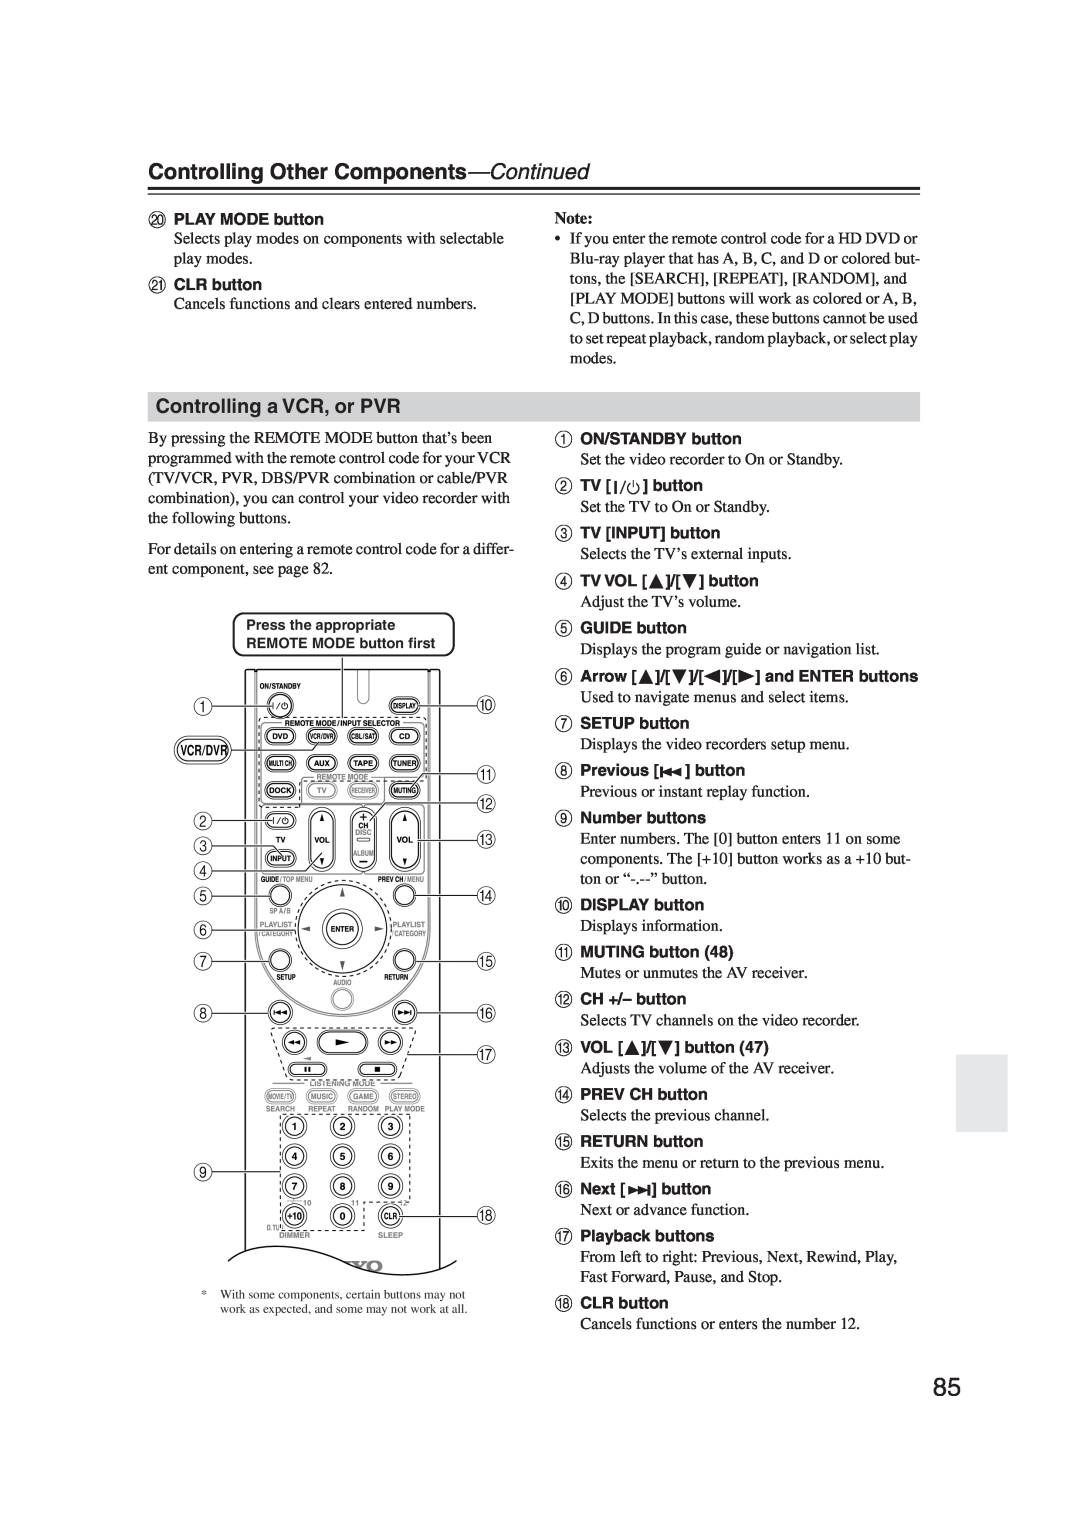 Onkyo S5100 instruction manual Controlling a VCR, or PVR, Controlling Other Components—Continued 